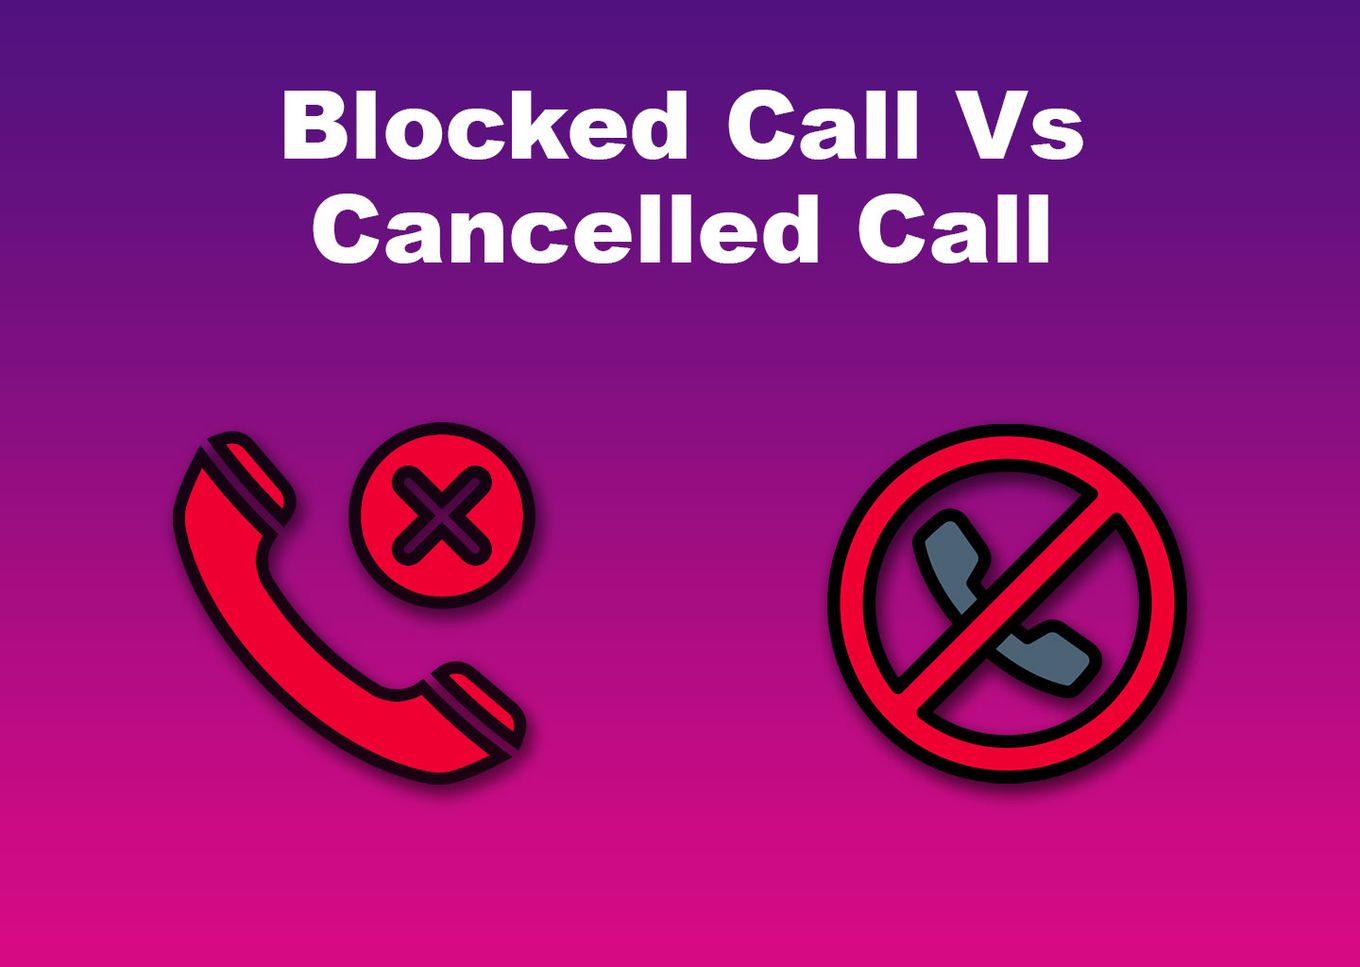 Blocked Call vs. Cancelled Call